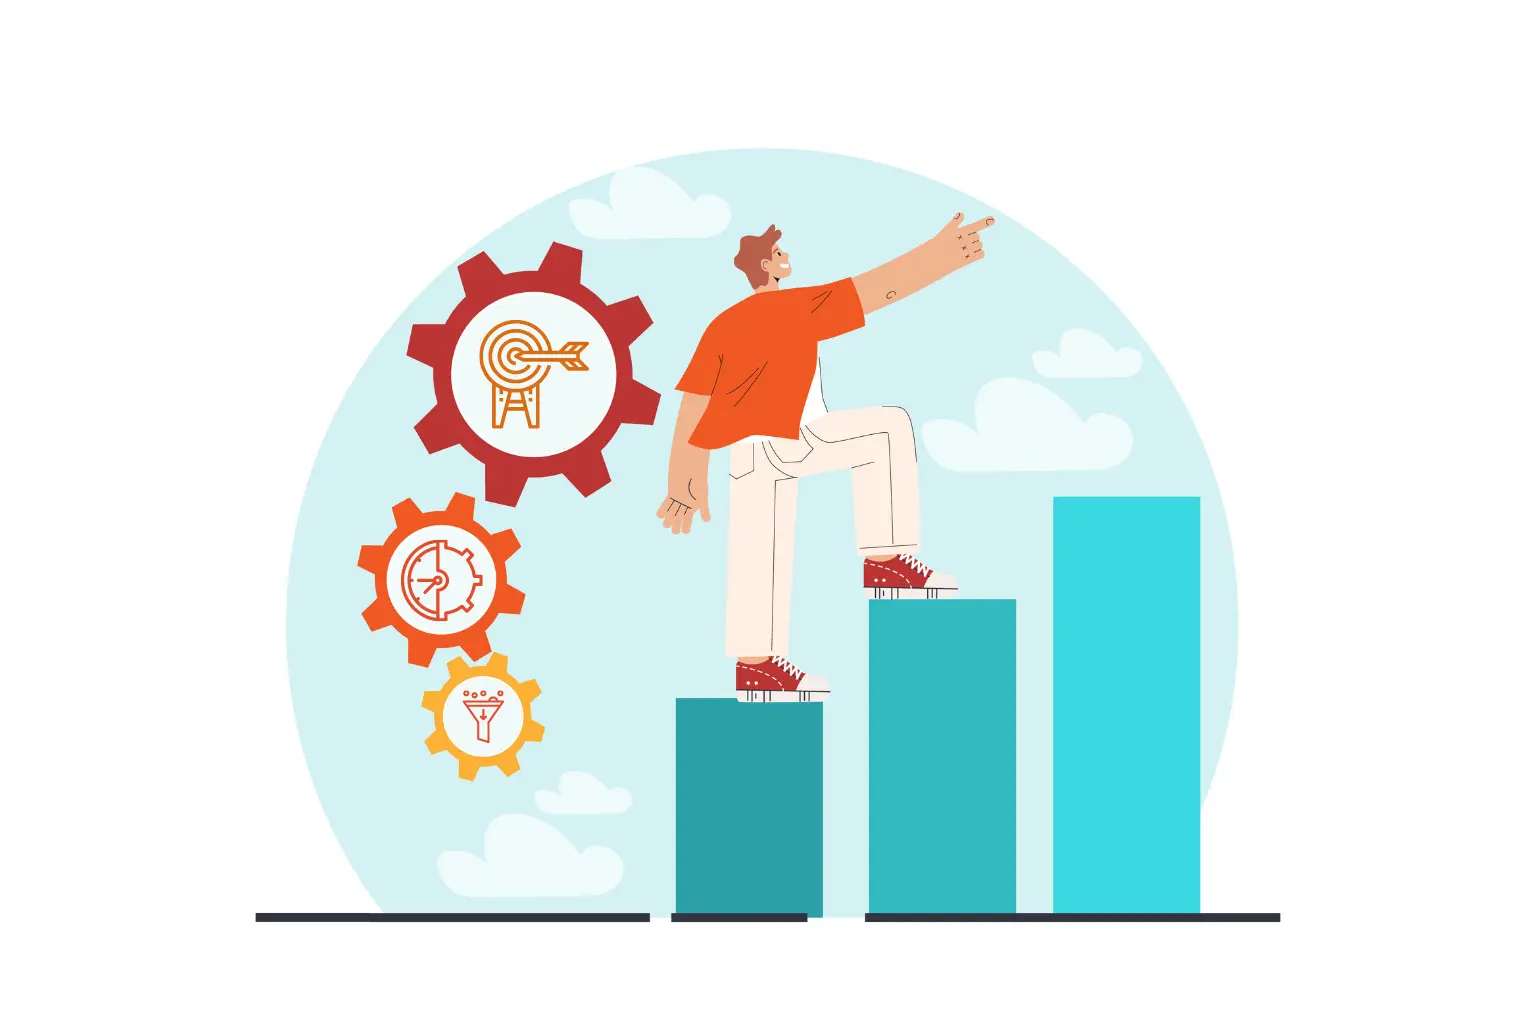 A person standing atop a graph aiming for growth. Behind him, customized vectors of goal, time management and leads funnel are mentioned. 